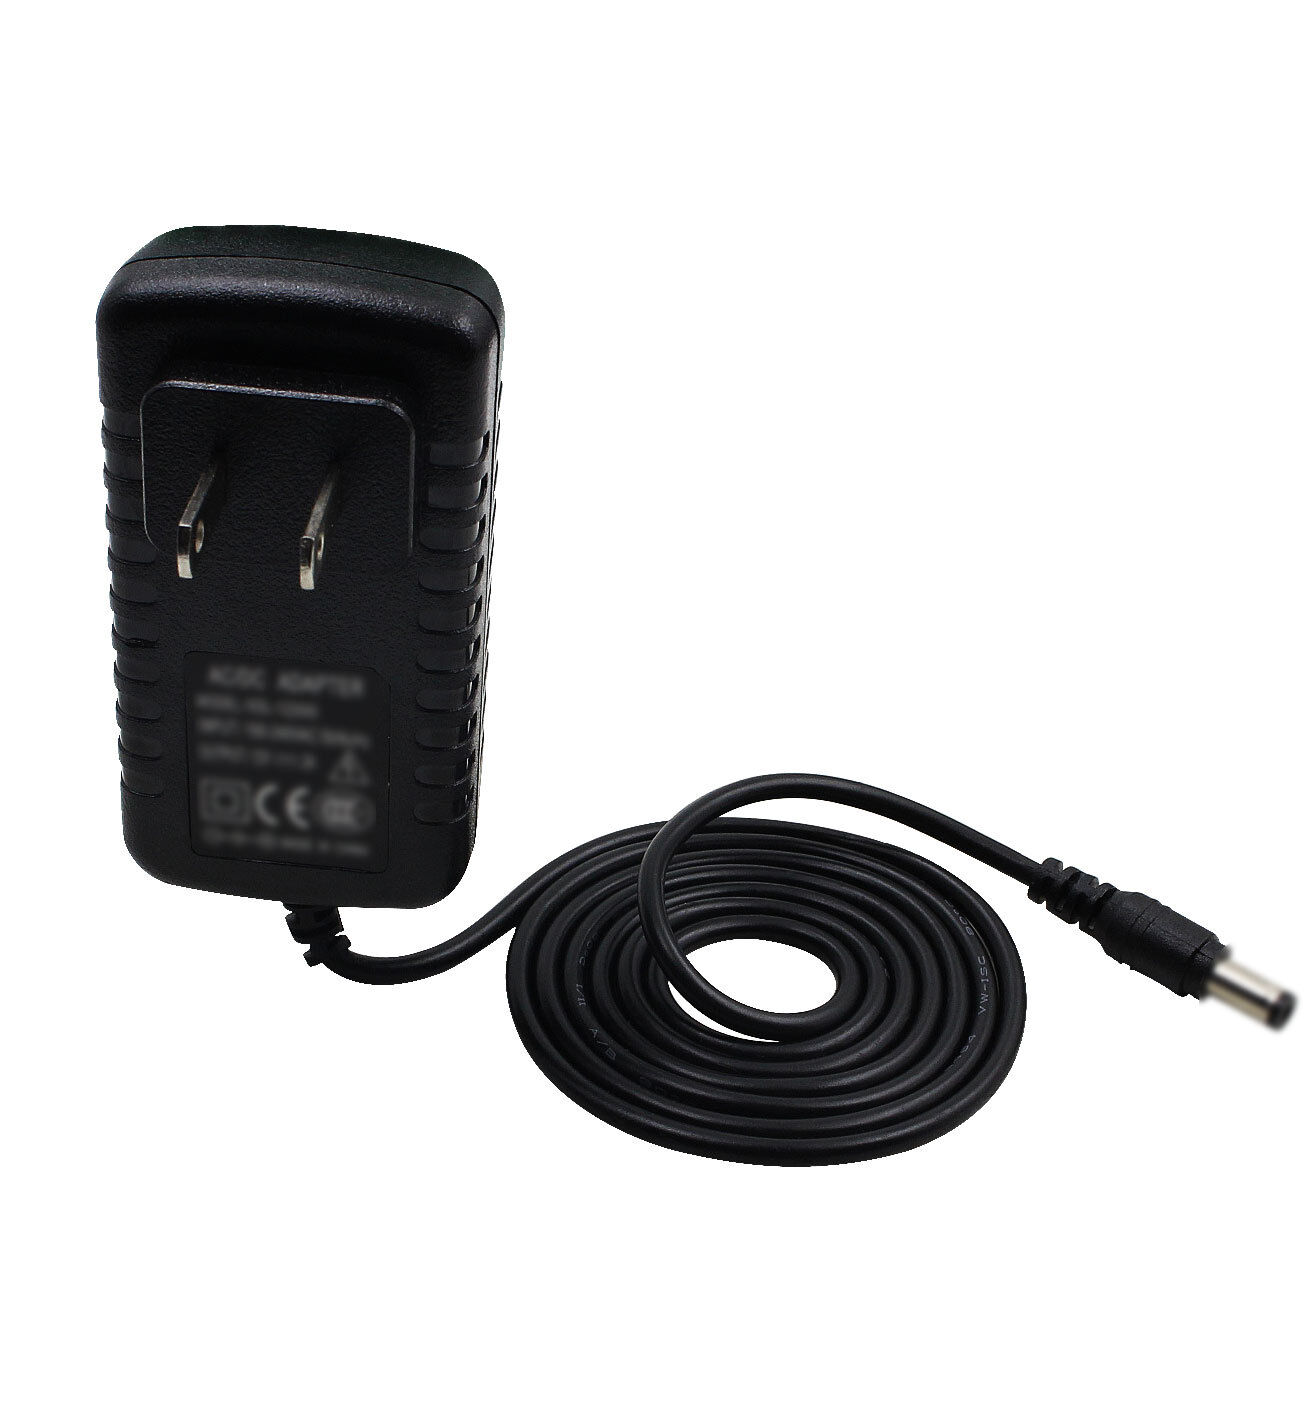 AC Adapter Power Supply Charger for SONY Portable Bluetooth Speaker SRS-XB3 Package includes: 1x Power Adapter (AU plug